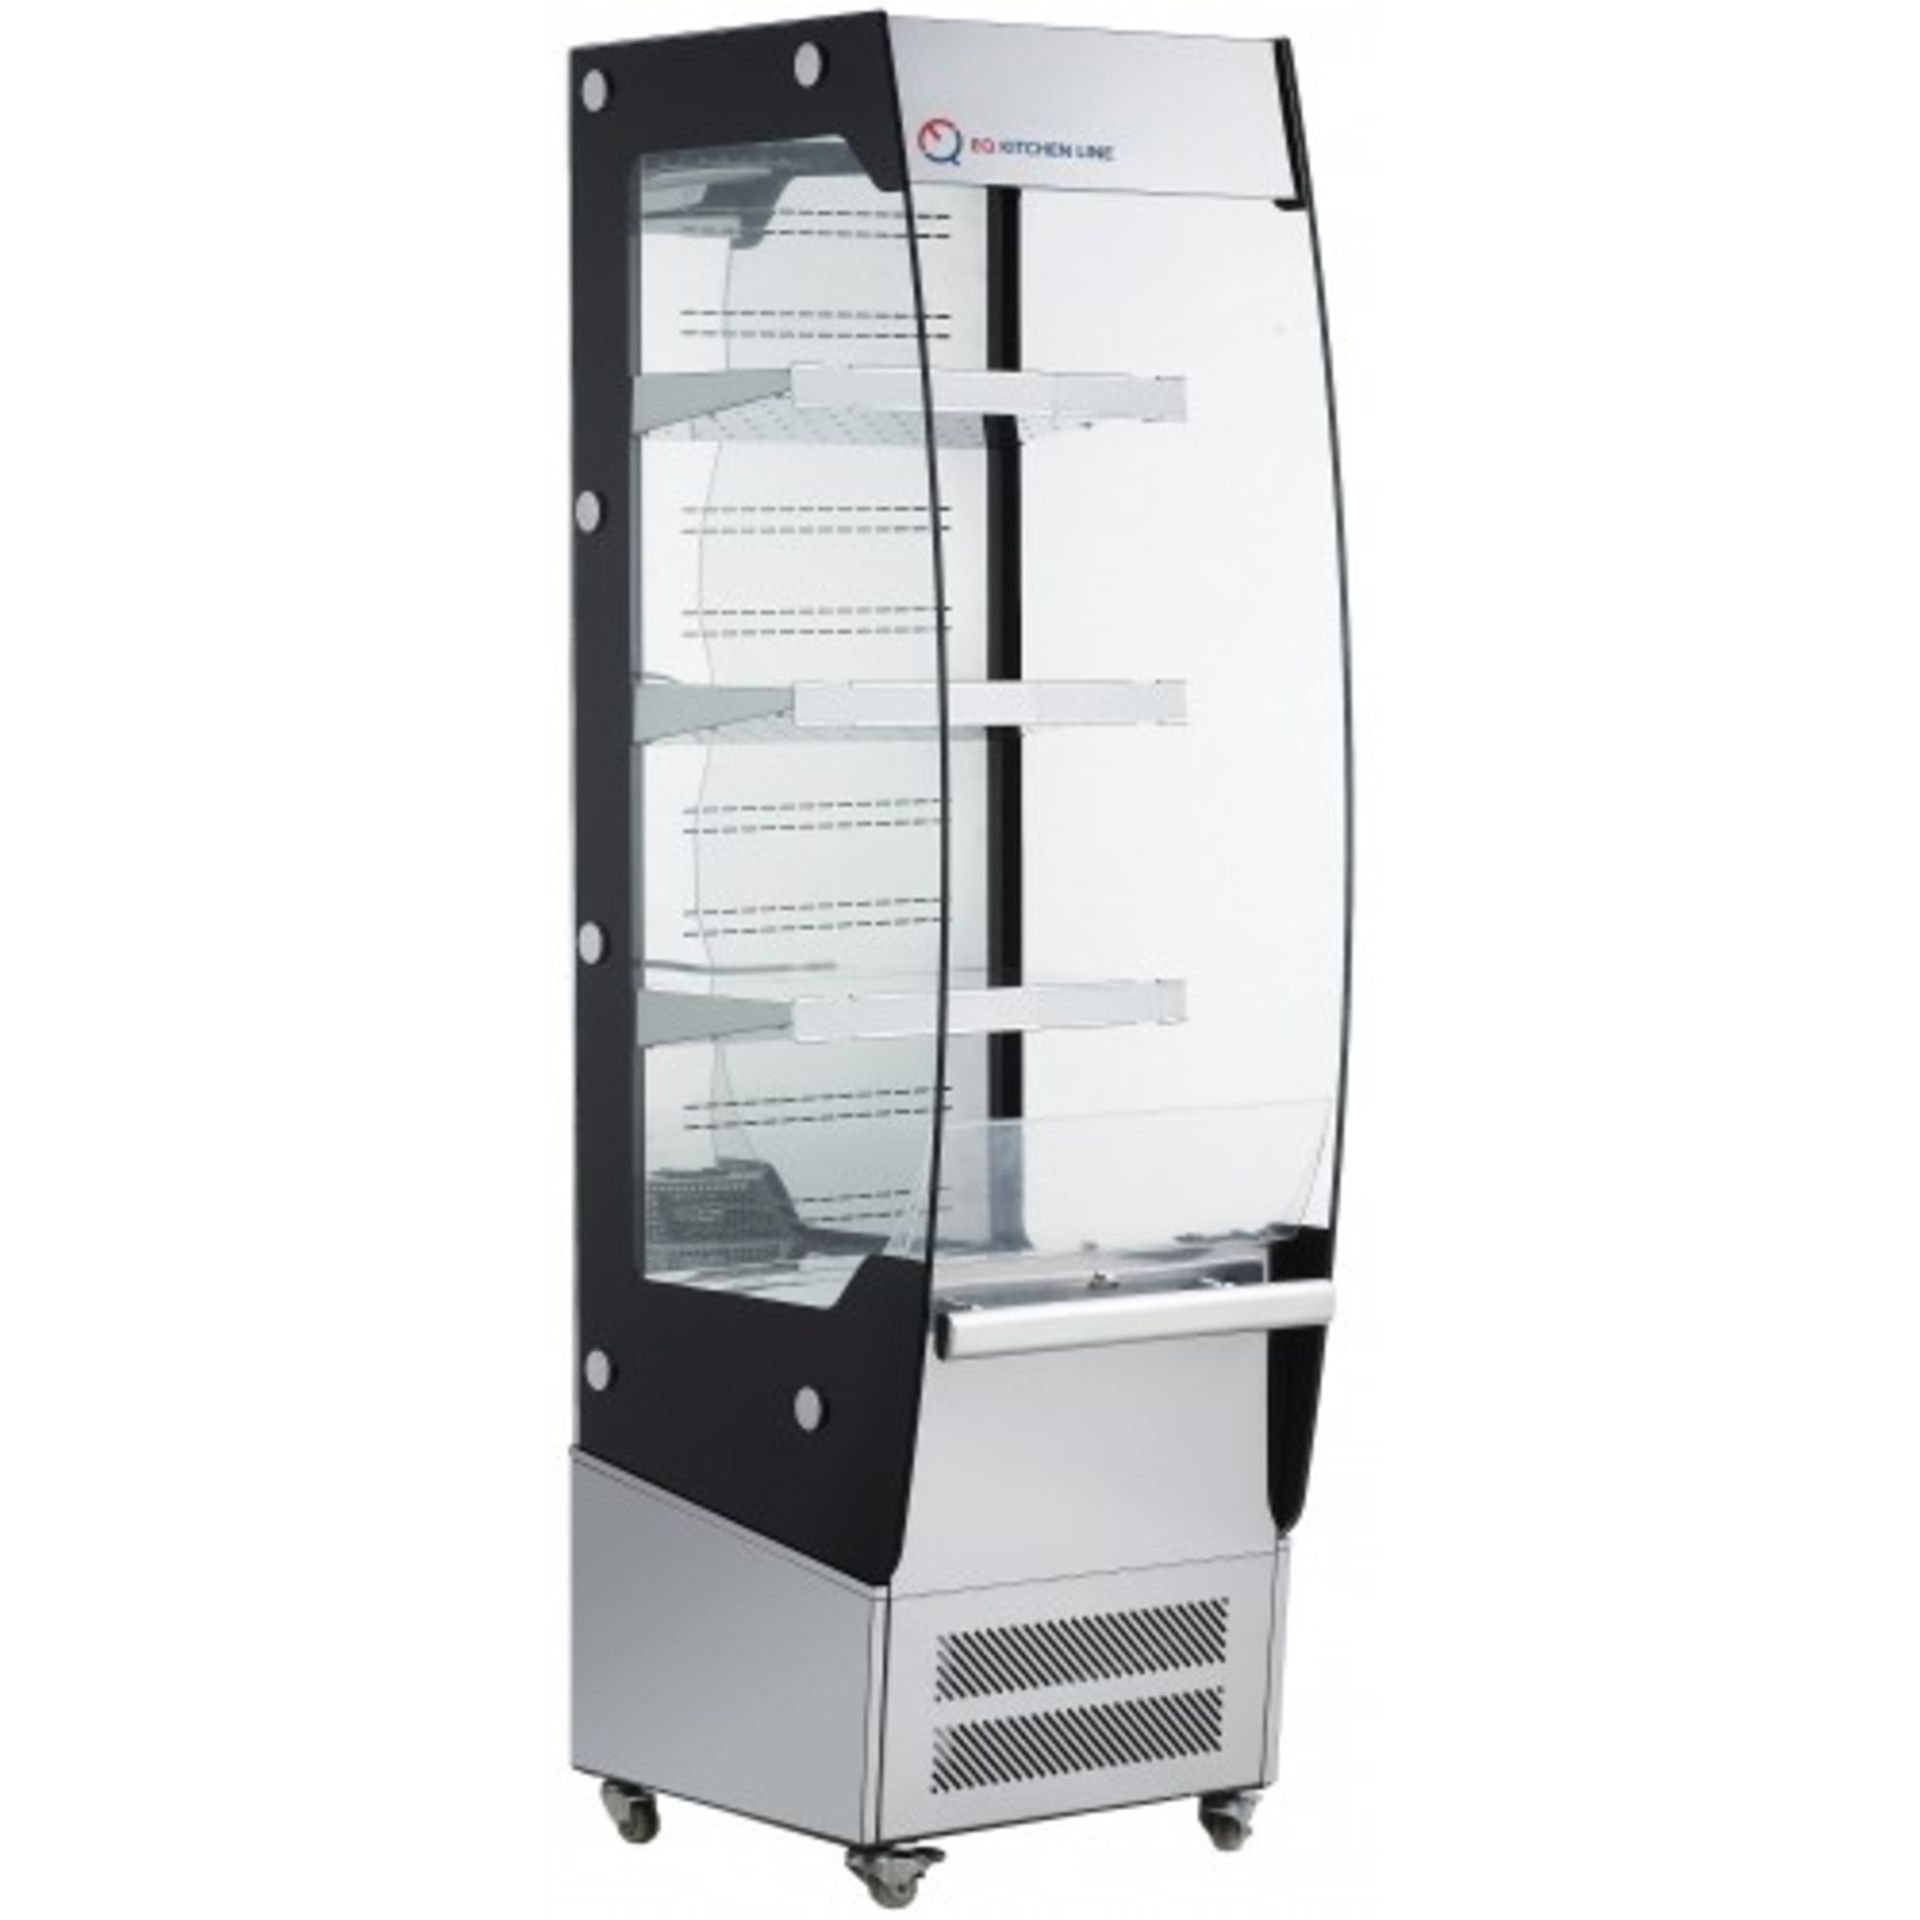 REFRIGERATED  OPEN DISPLAY CASE 68 INCH HIGH MODEL RTS-220 L